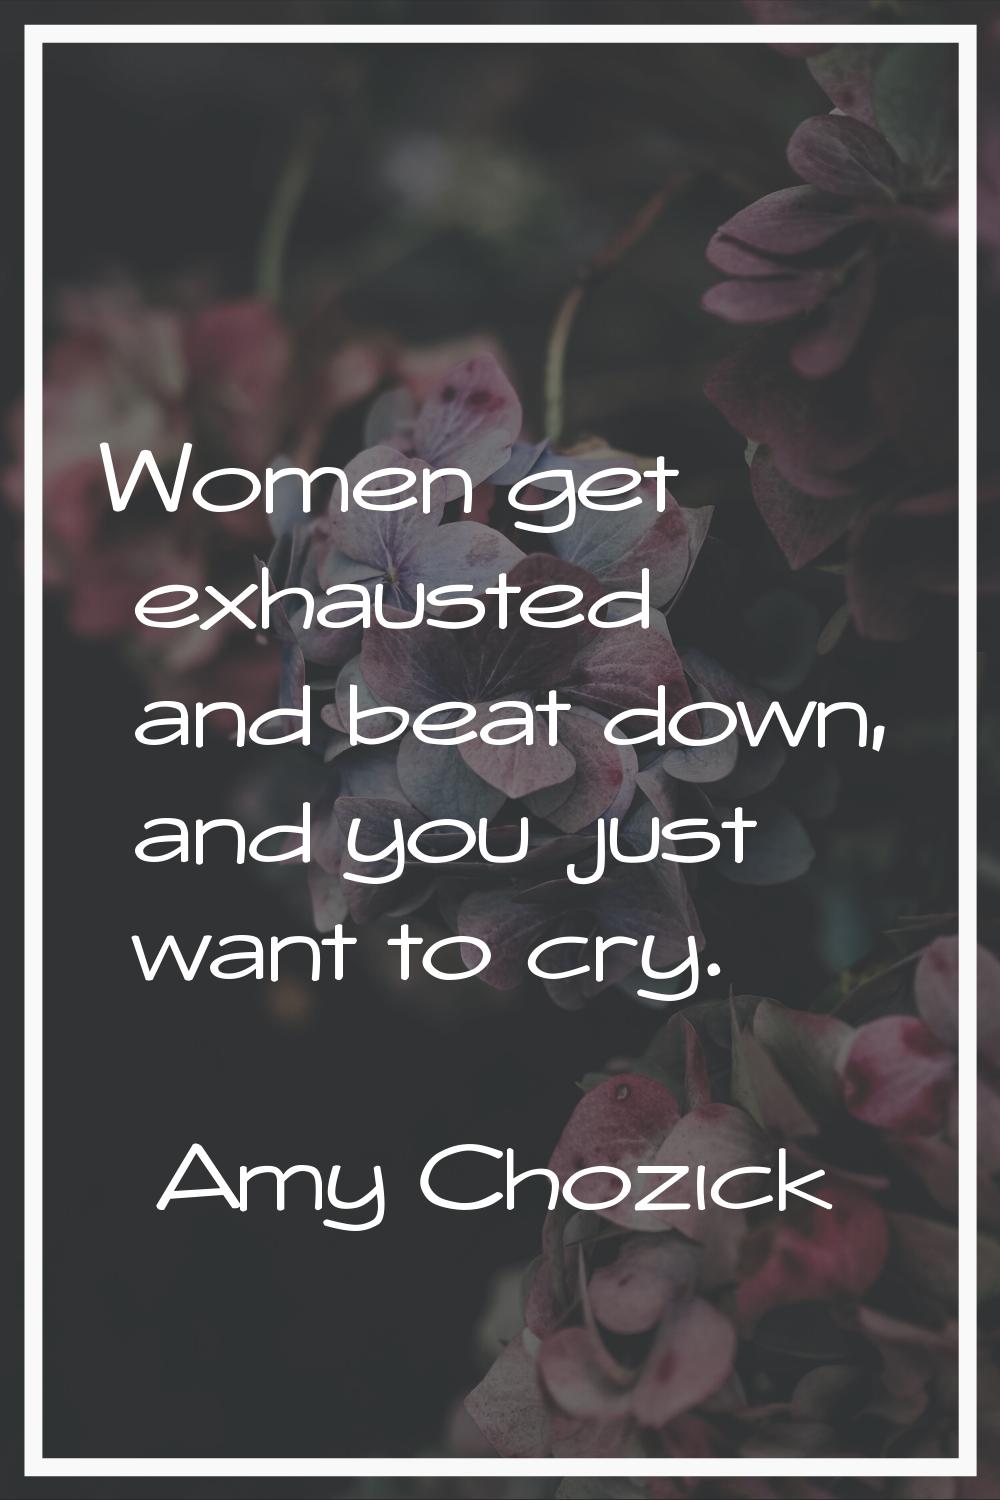 Women get exhausted and beat down, and you just want to cry.